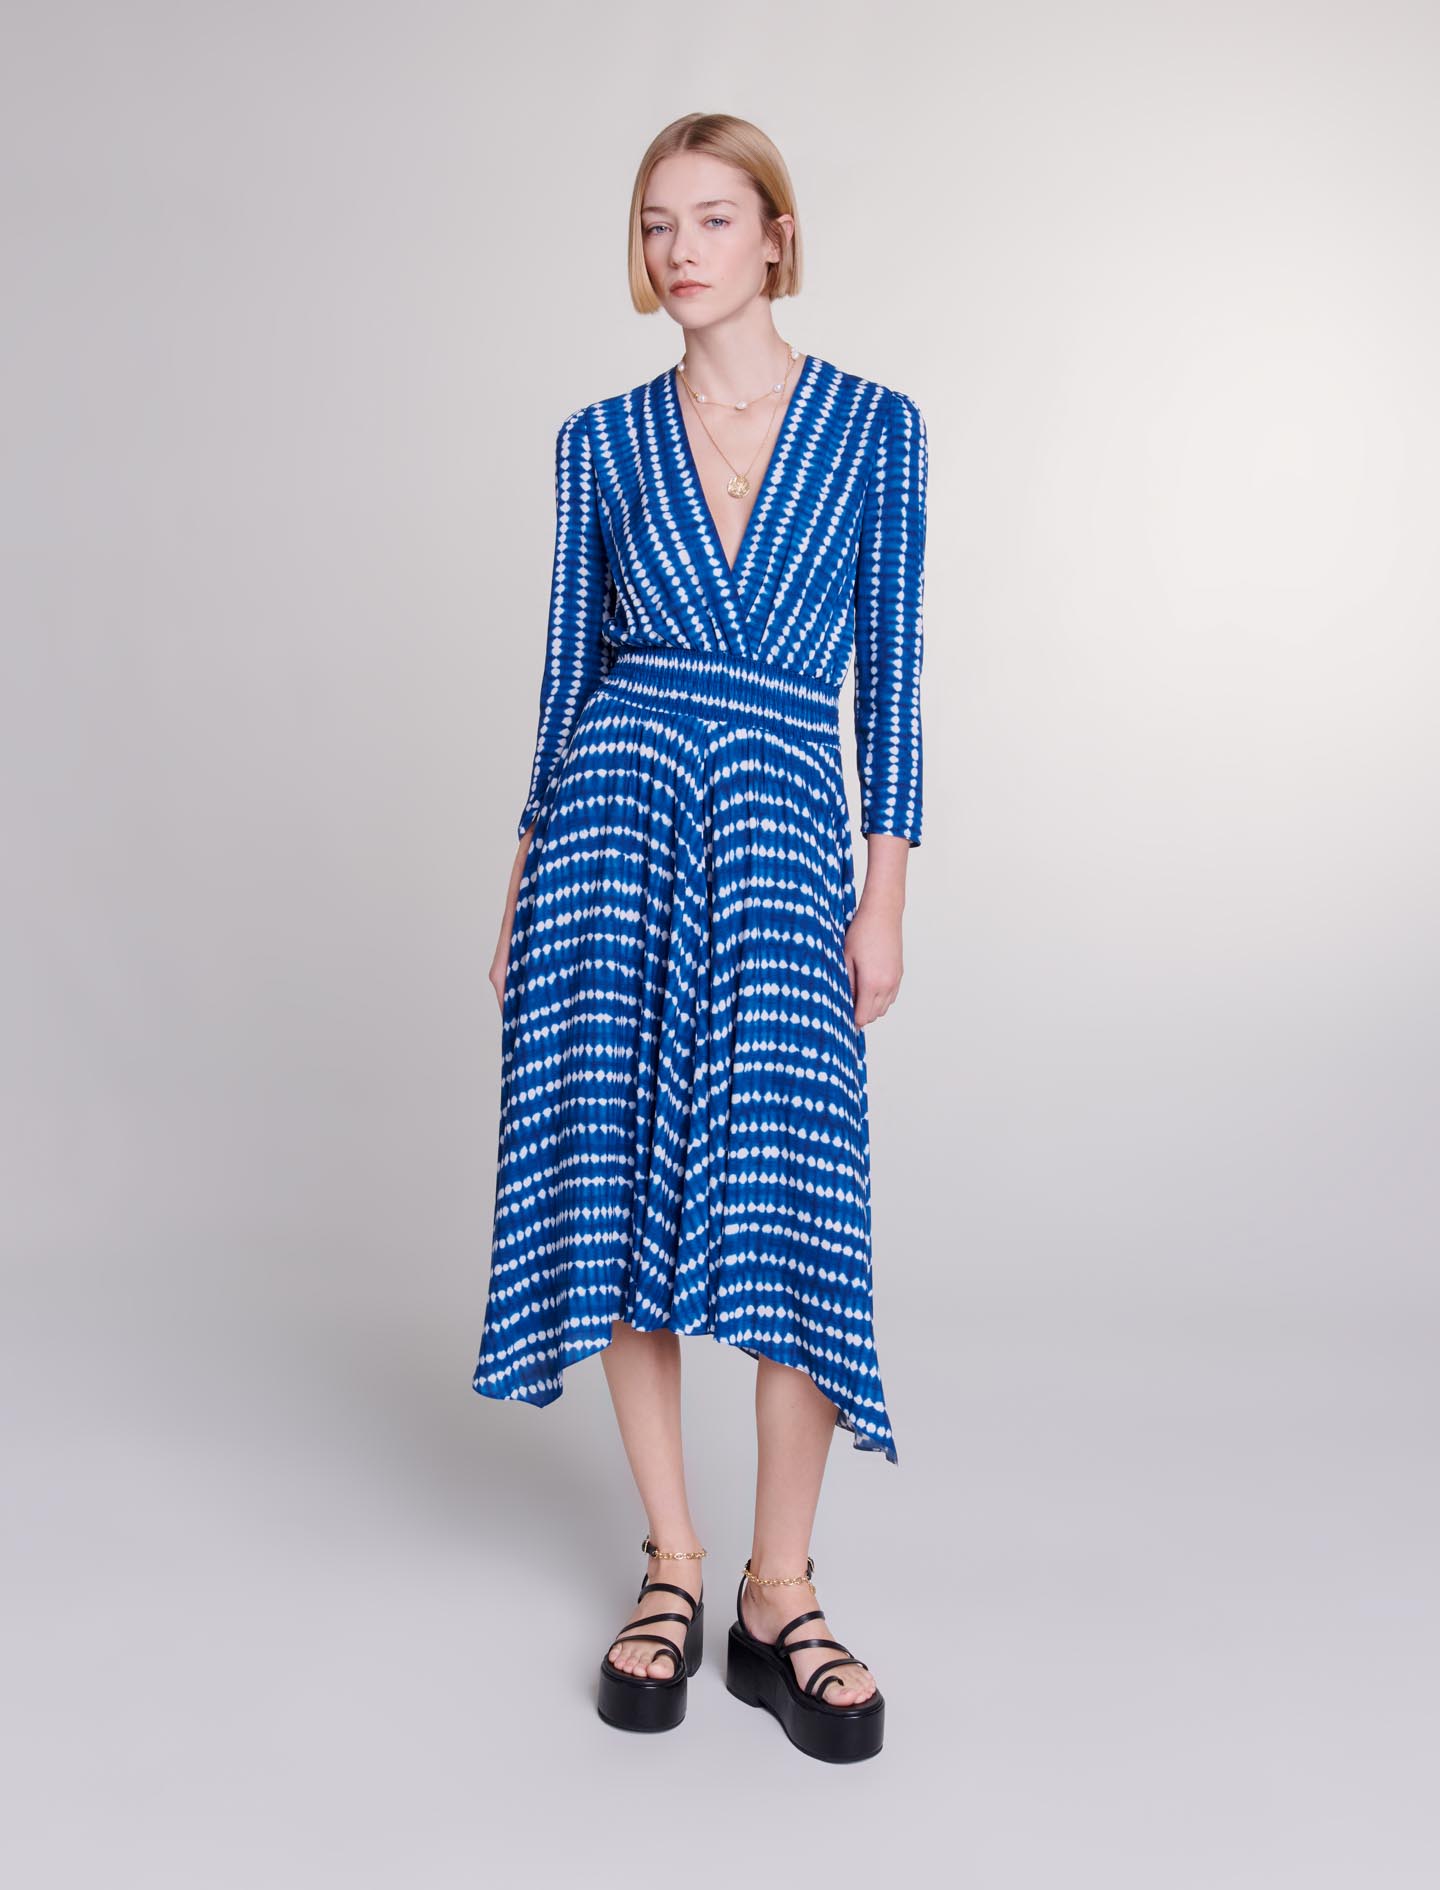 Maje Woman's viscose Asymmetrical maxi dress for Spring/Summer, in color Tie-dye blue drop print /